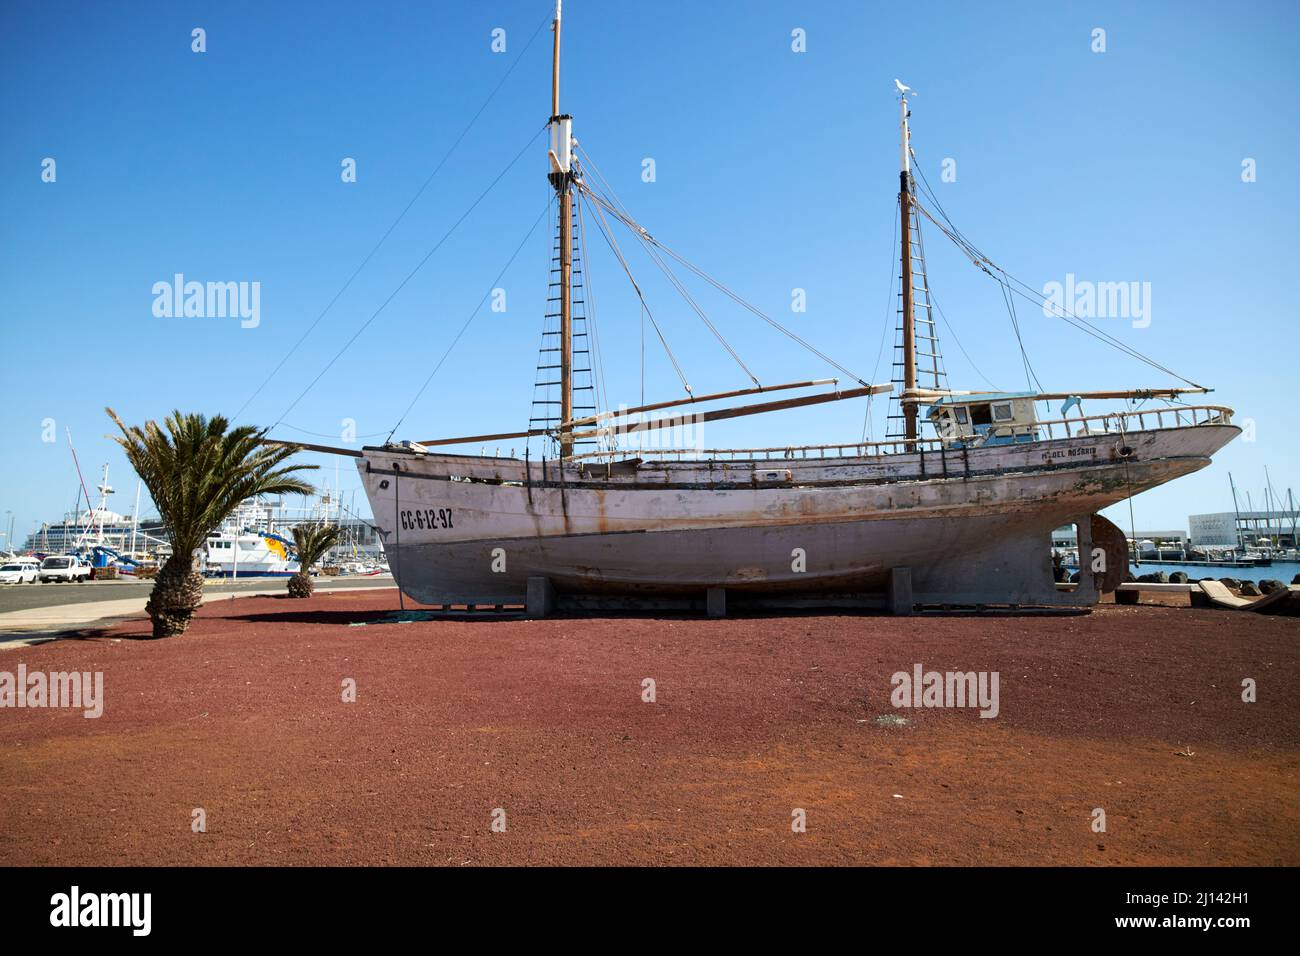 twin mast old wooden canary islands fishing boat m del rosario ashore on hard standing in puerto naos arrecife lanzarote canary islands spain Stock Photo